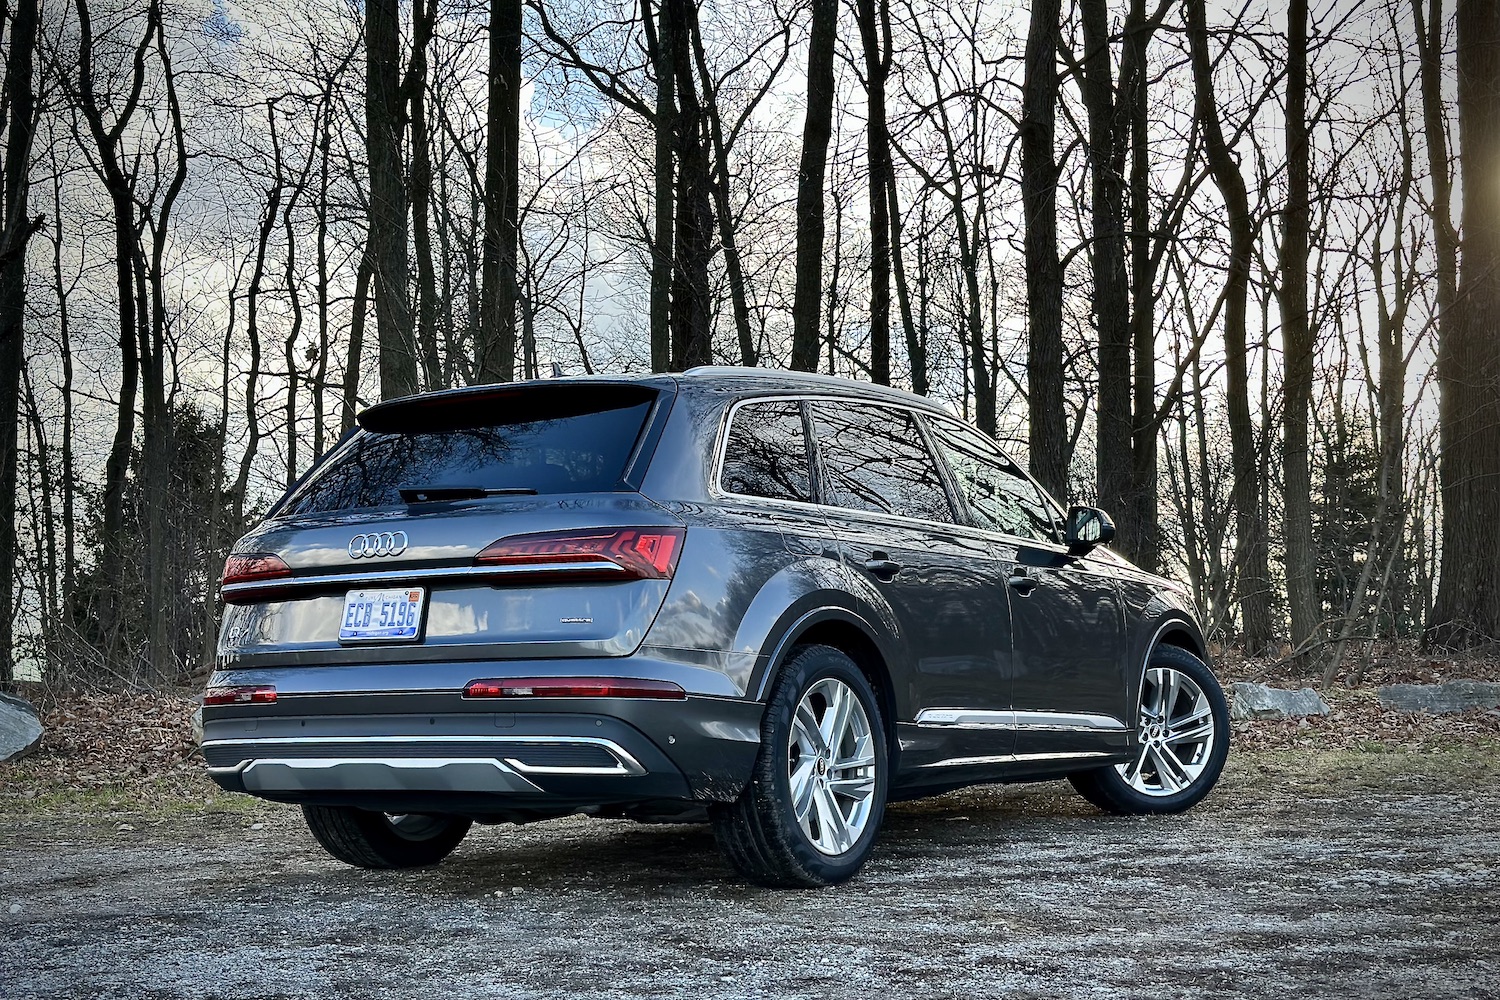 Rear end angle of the 2022 Audi Q7 Prestige from the passenger's side with trees in the back.